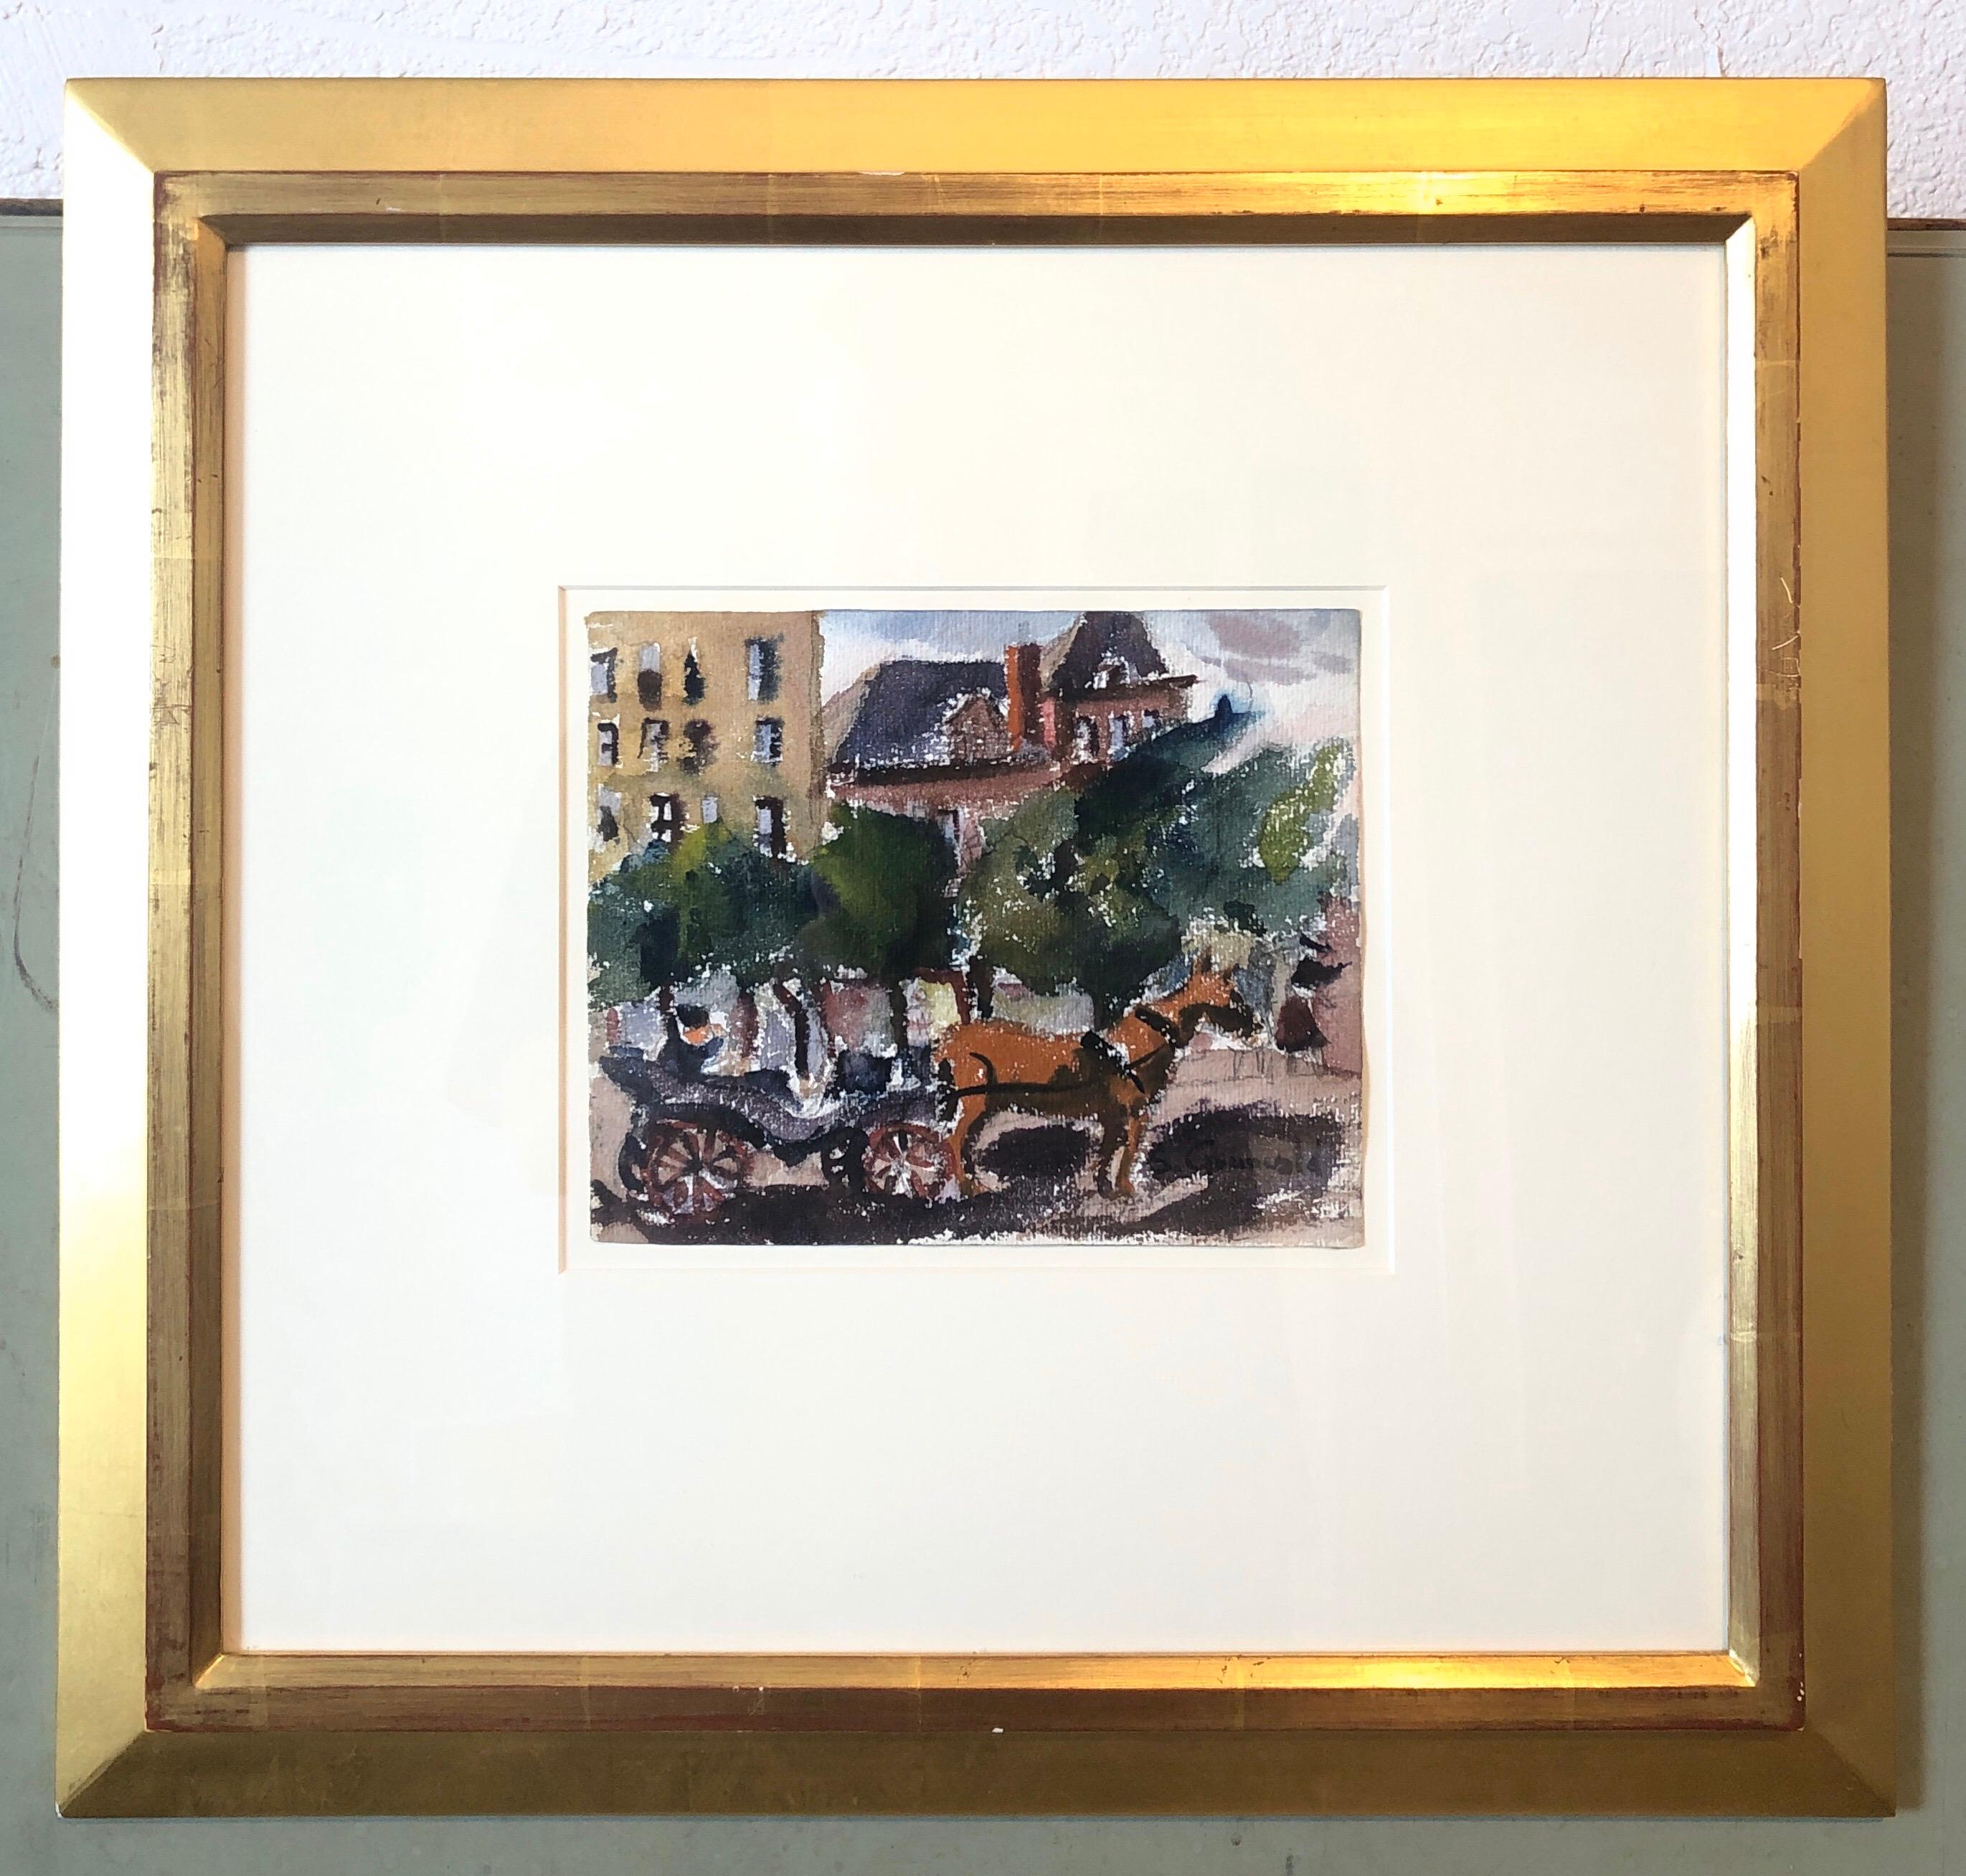 Horse and Buggy 59th st. Manhattan (fauvist painting of NYC outside central park) 1940's.
image is 6.25 X 7.5 inches. Hand signed lower right
Provenance: Greenwich Gallery (Greenwich CT)

Samuel Grunvald was a Hungarian born American WPA artist